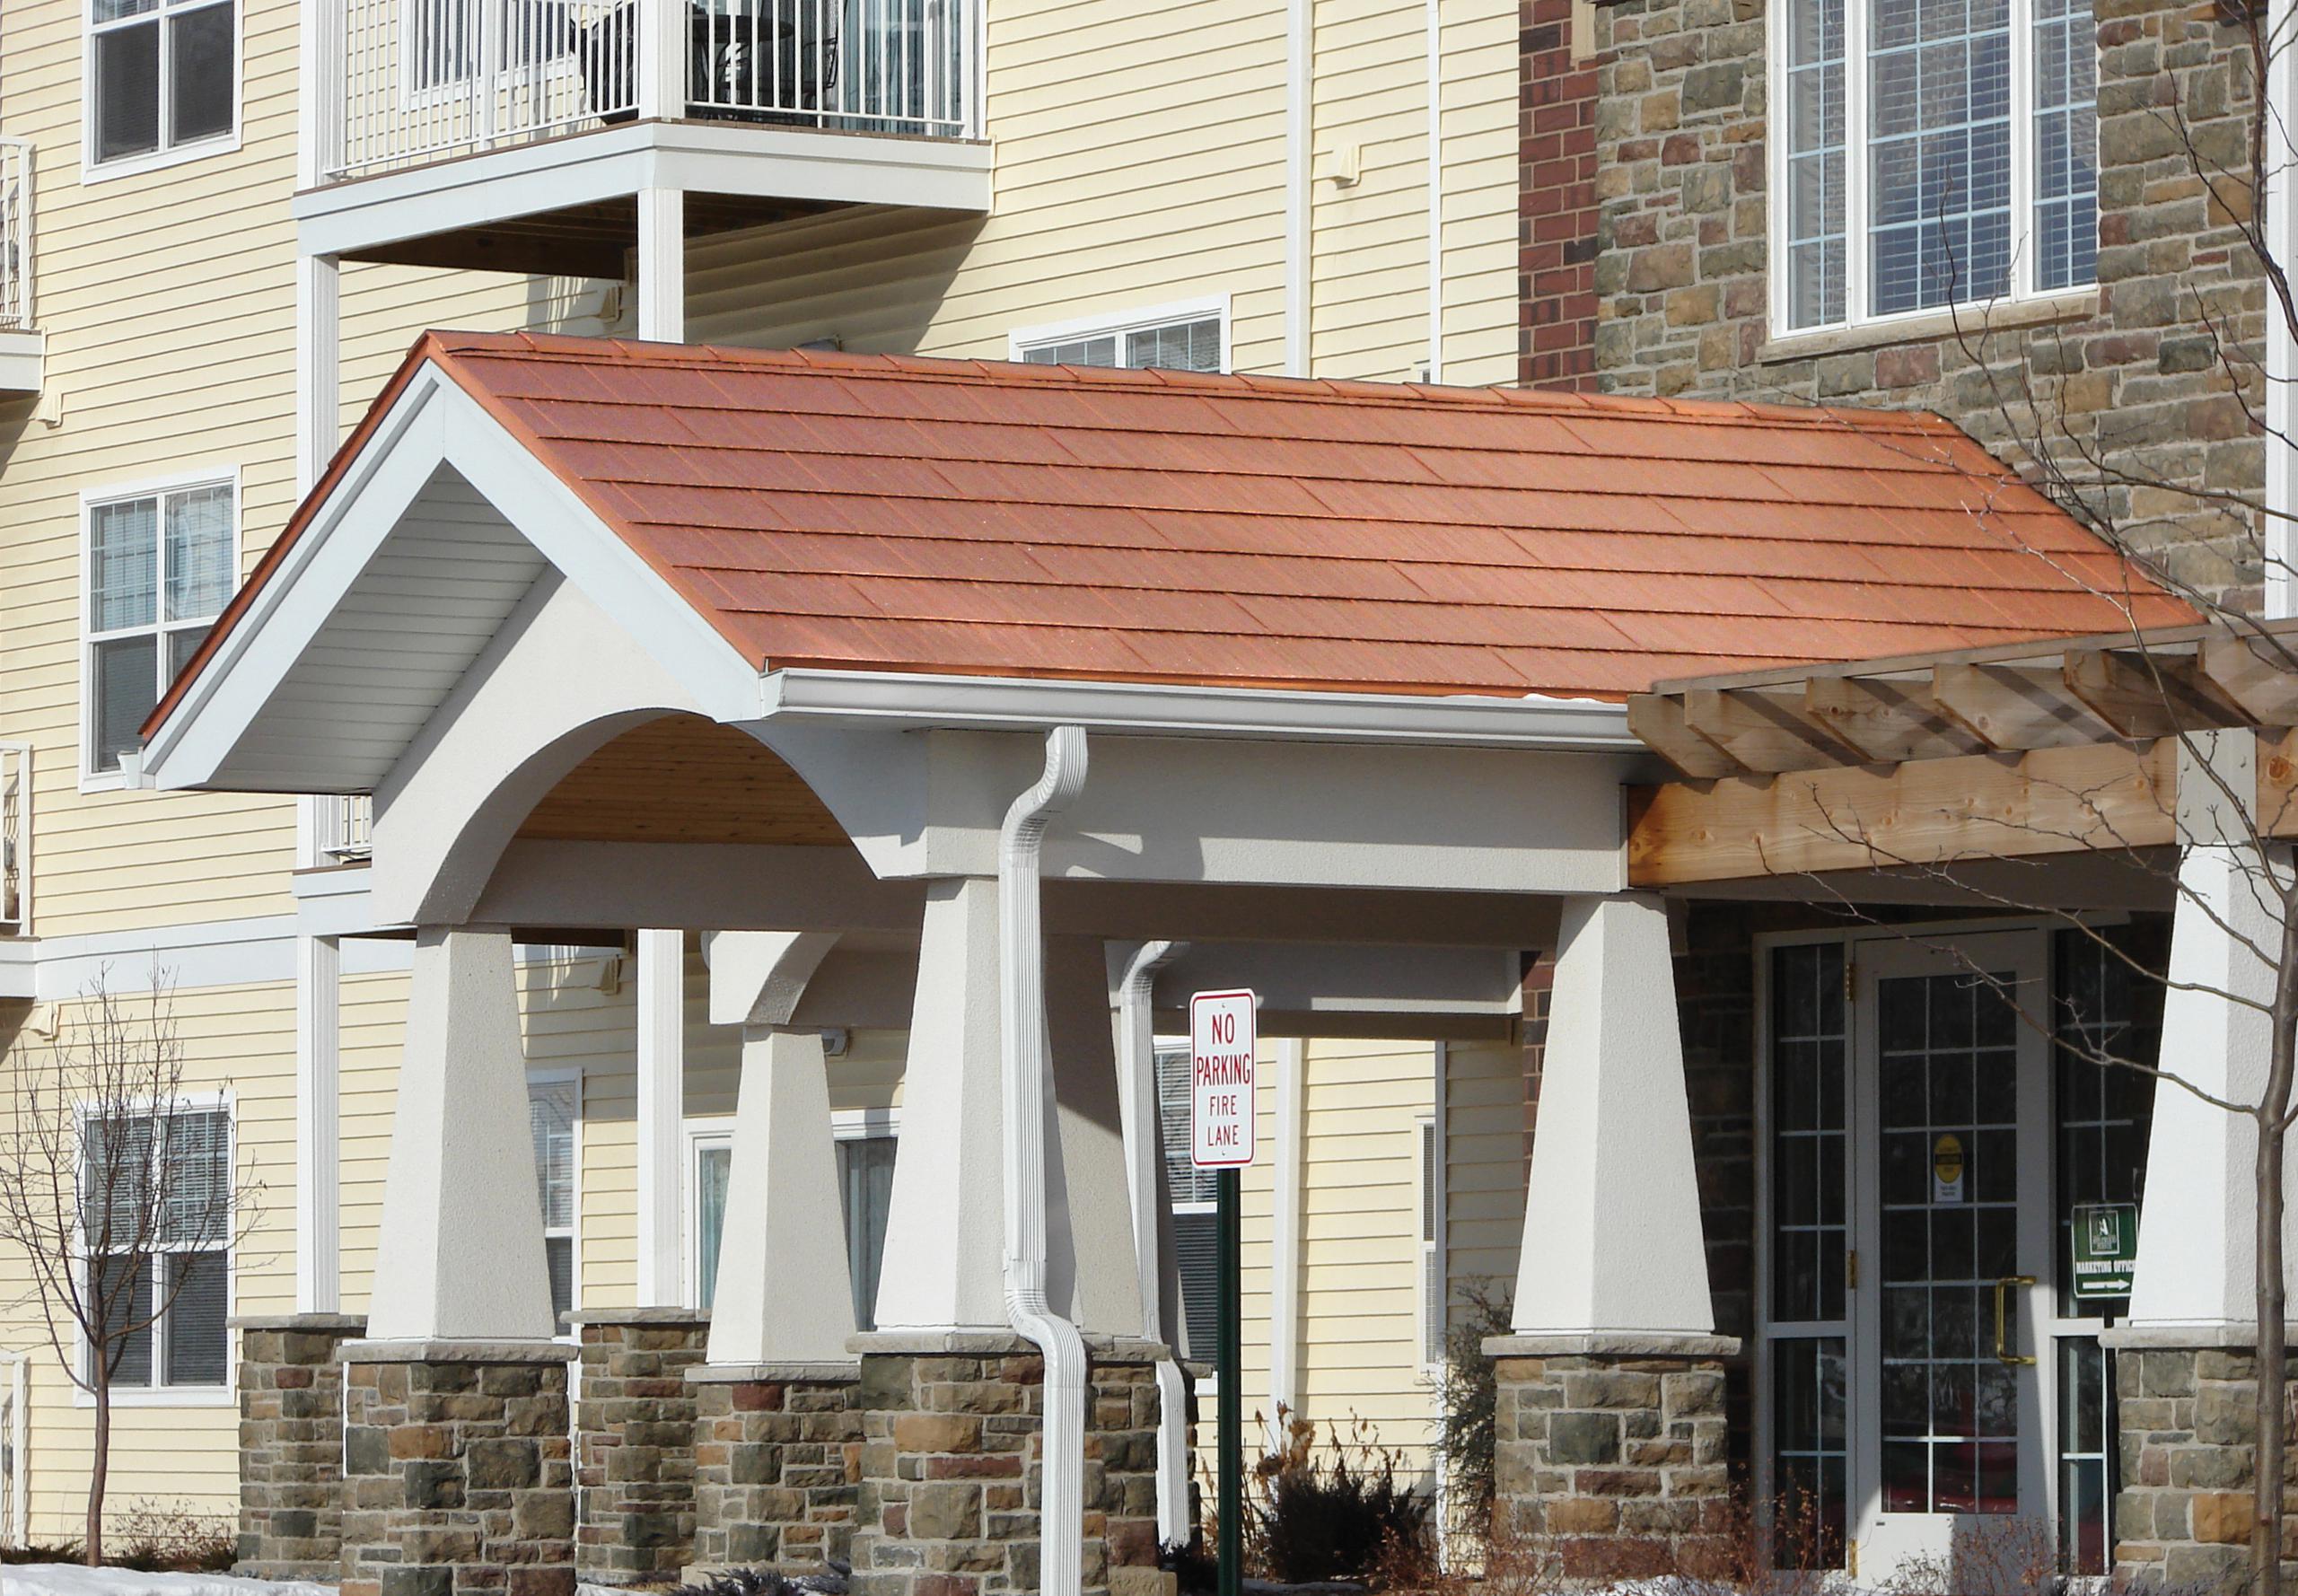 The covering of the entrance to an apartment complex showcases the Arrowline Shake Copper Roofing to bring out the rich colors of the stone and brick installed on the building.